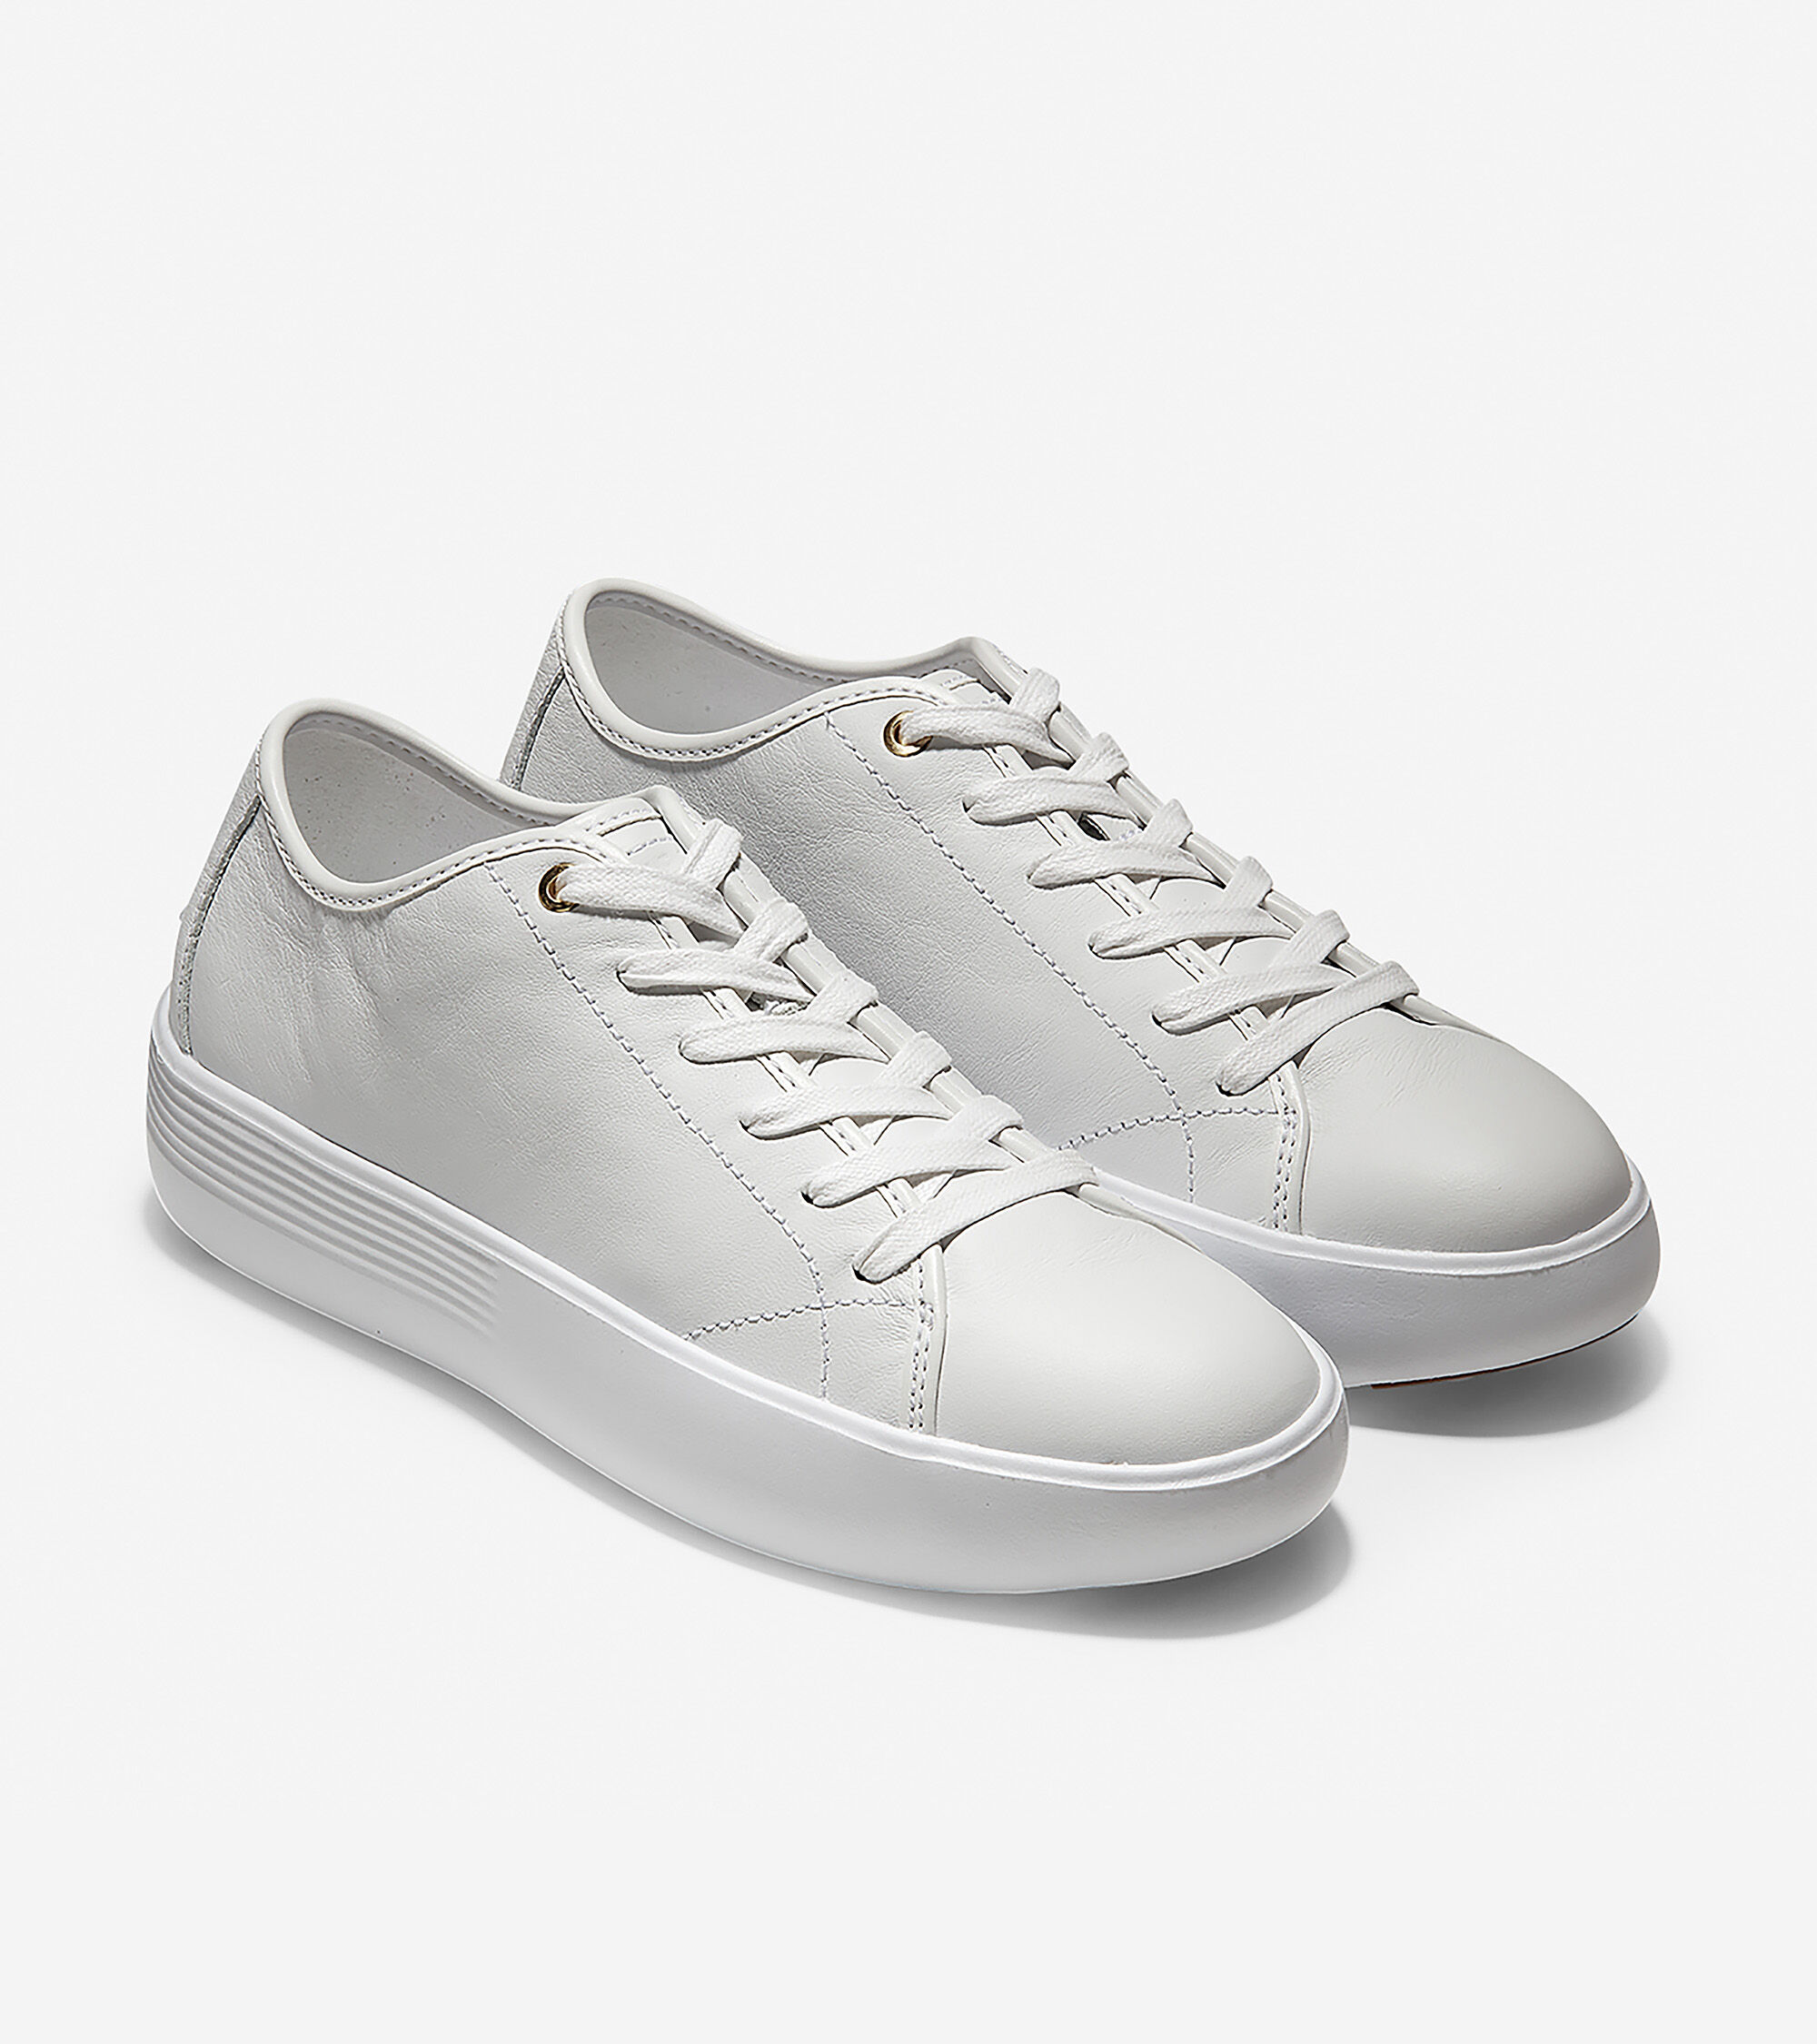 cole haan white leather sneakers womens